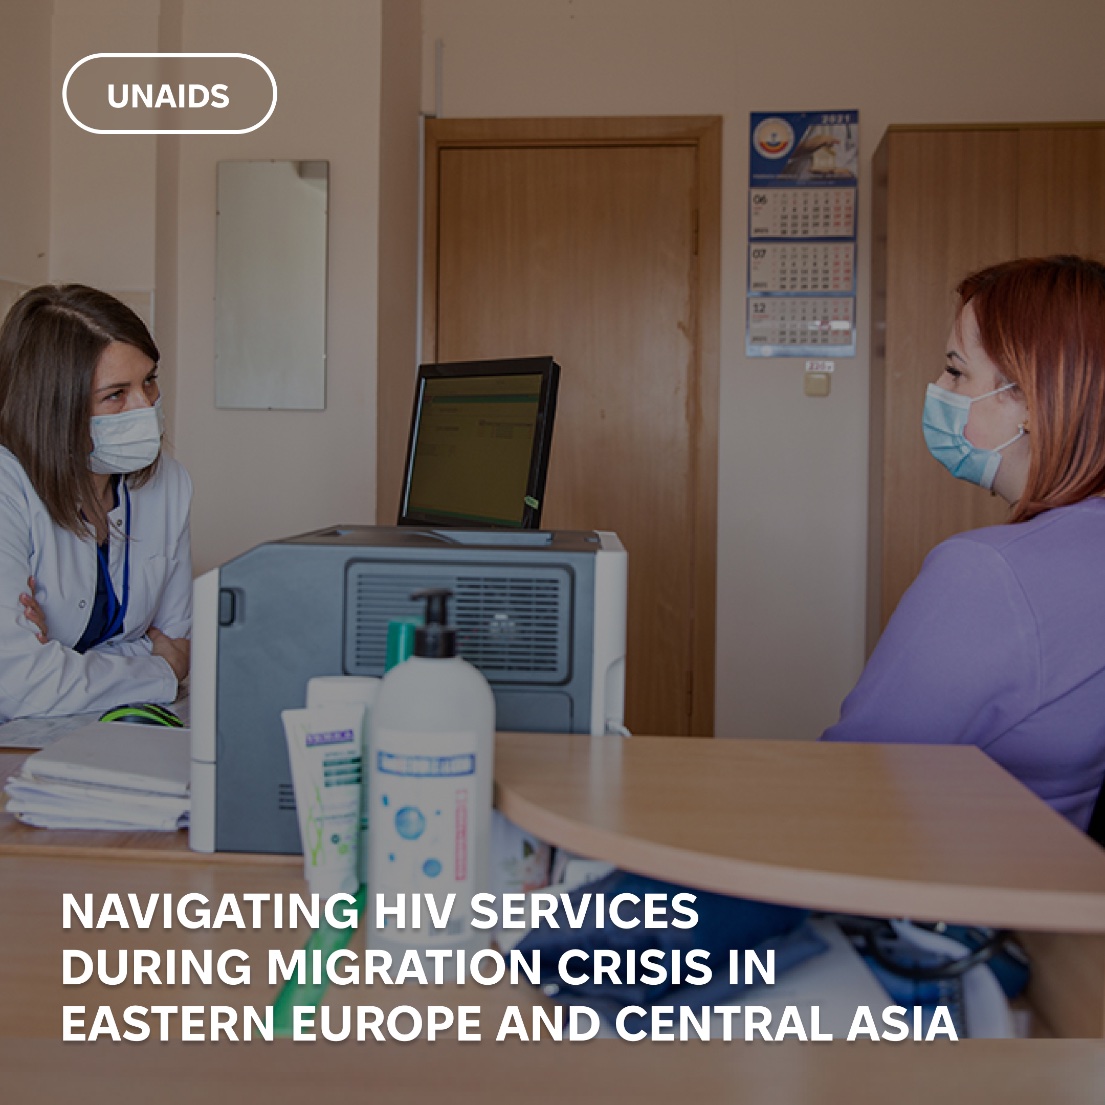 The UNAIDS team has prepared a new article, based on research and human stories, to draw attention to this critical issue. Learn more: bit.ly/4481FJp